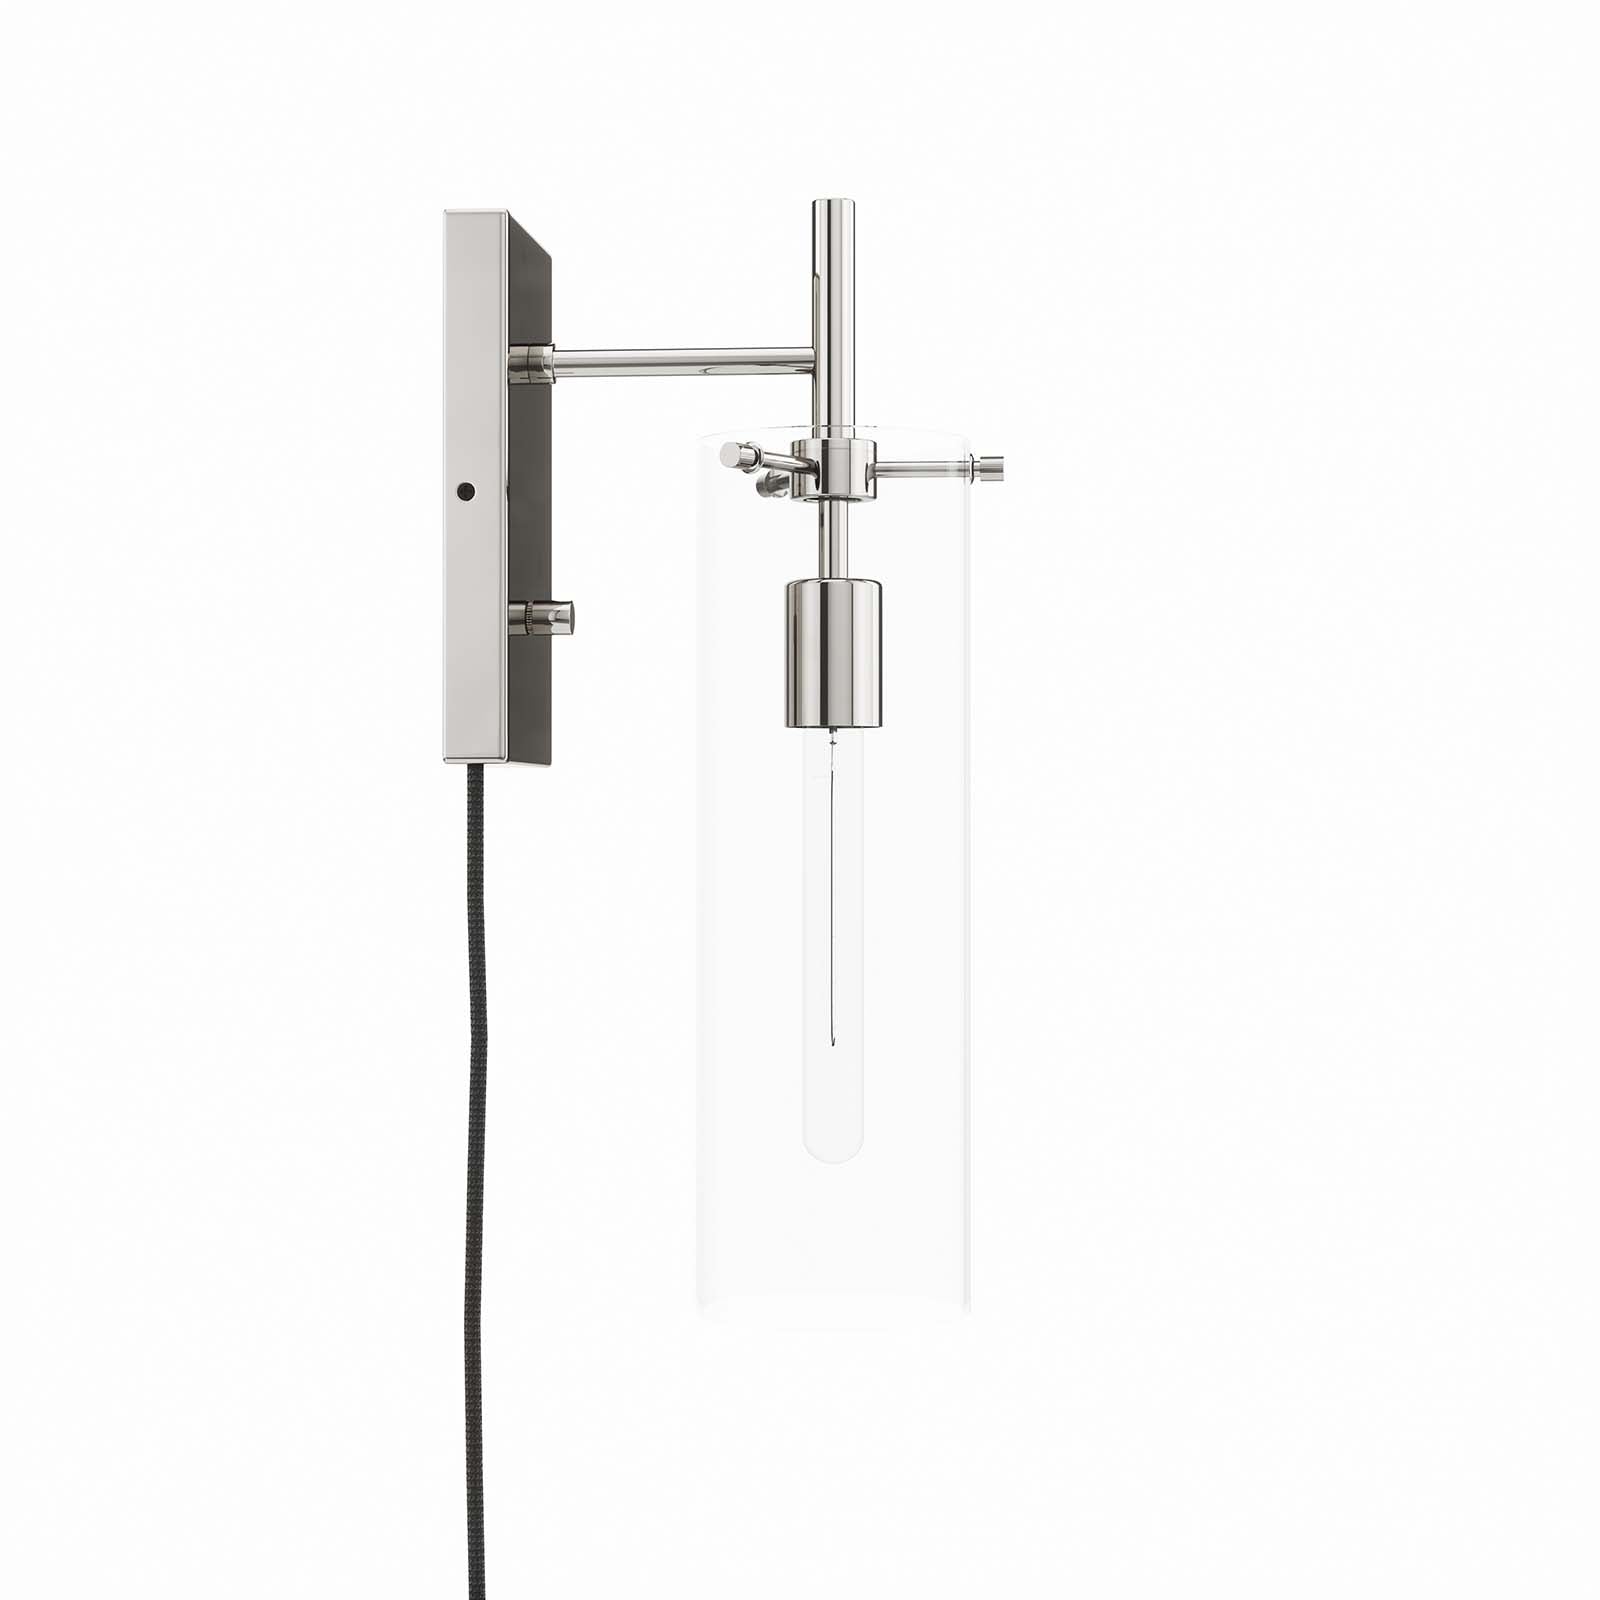 Modway Wall Sconces - Skylark-Wall-Sconce-Clear-Polished-Nickel